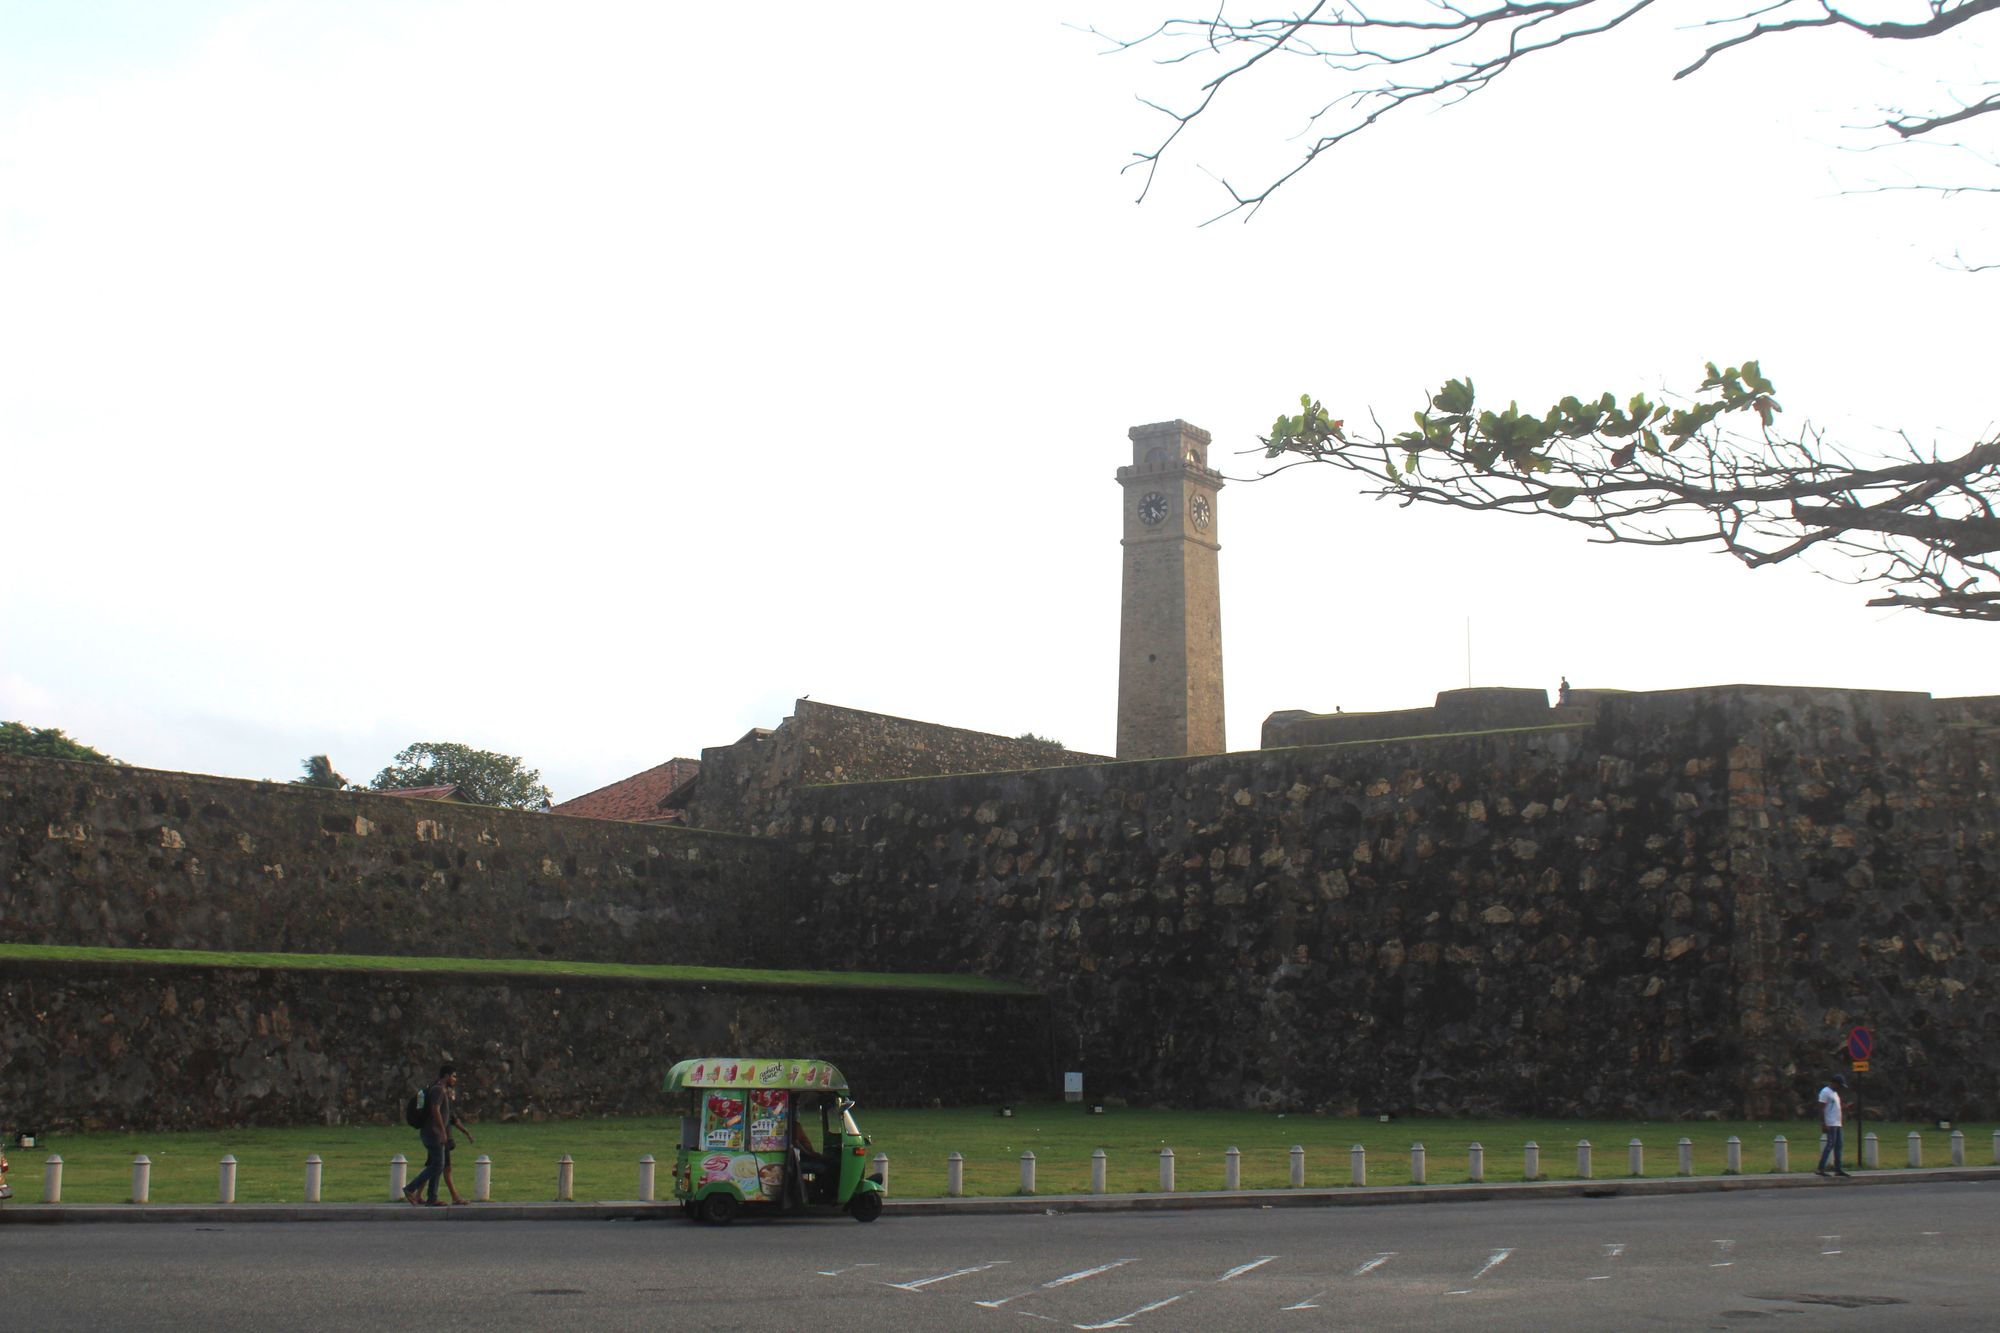 Galle Dutch Fort, Sri Lanka during the evening with people walking nearby